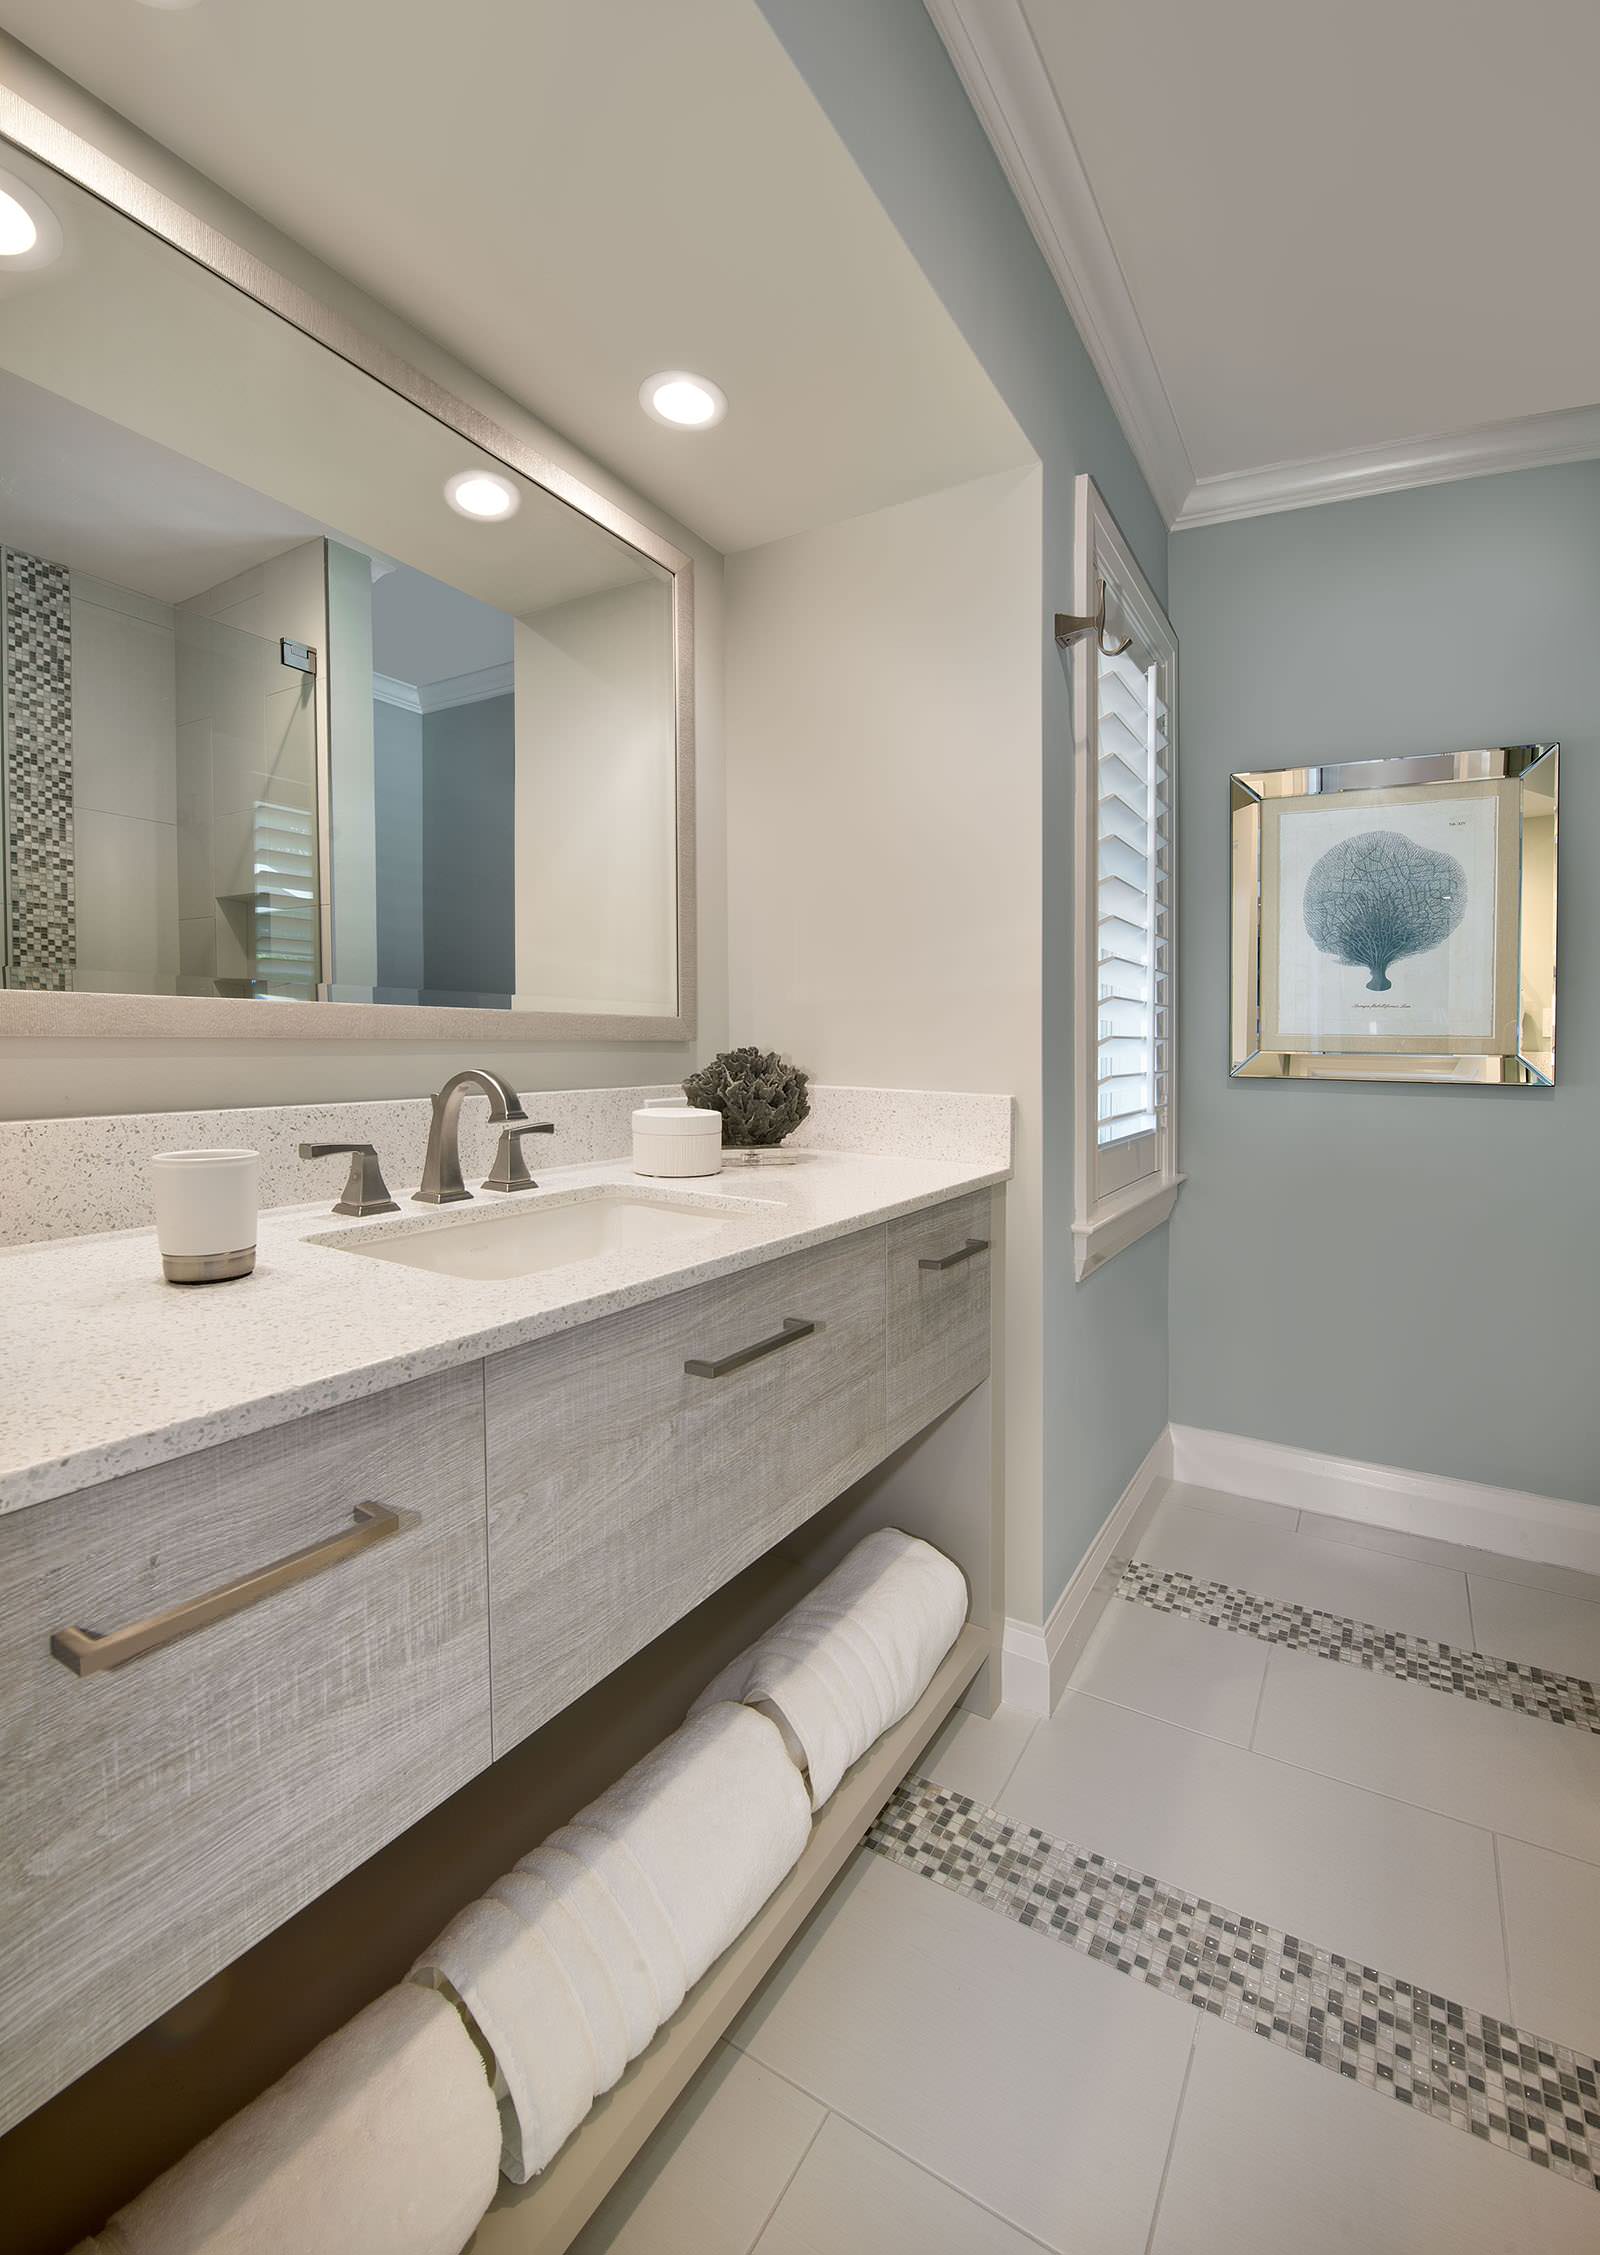 75 Beautiful Bathroom With Laminate Countertops Pictures Ideas August 2021 Houzz